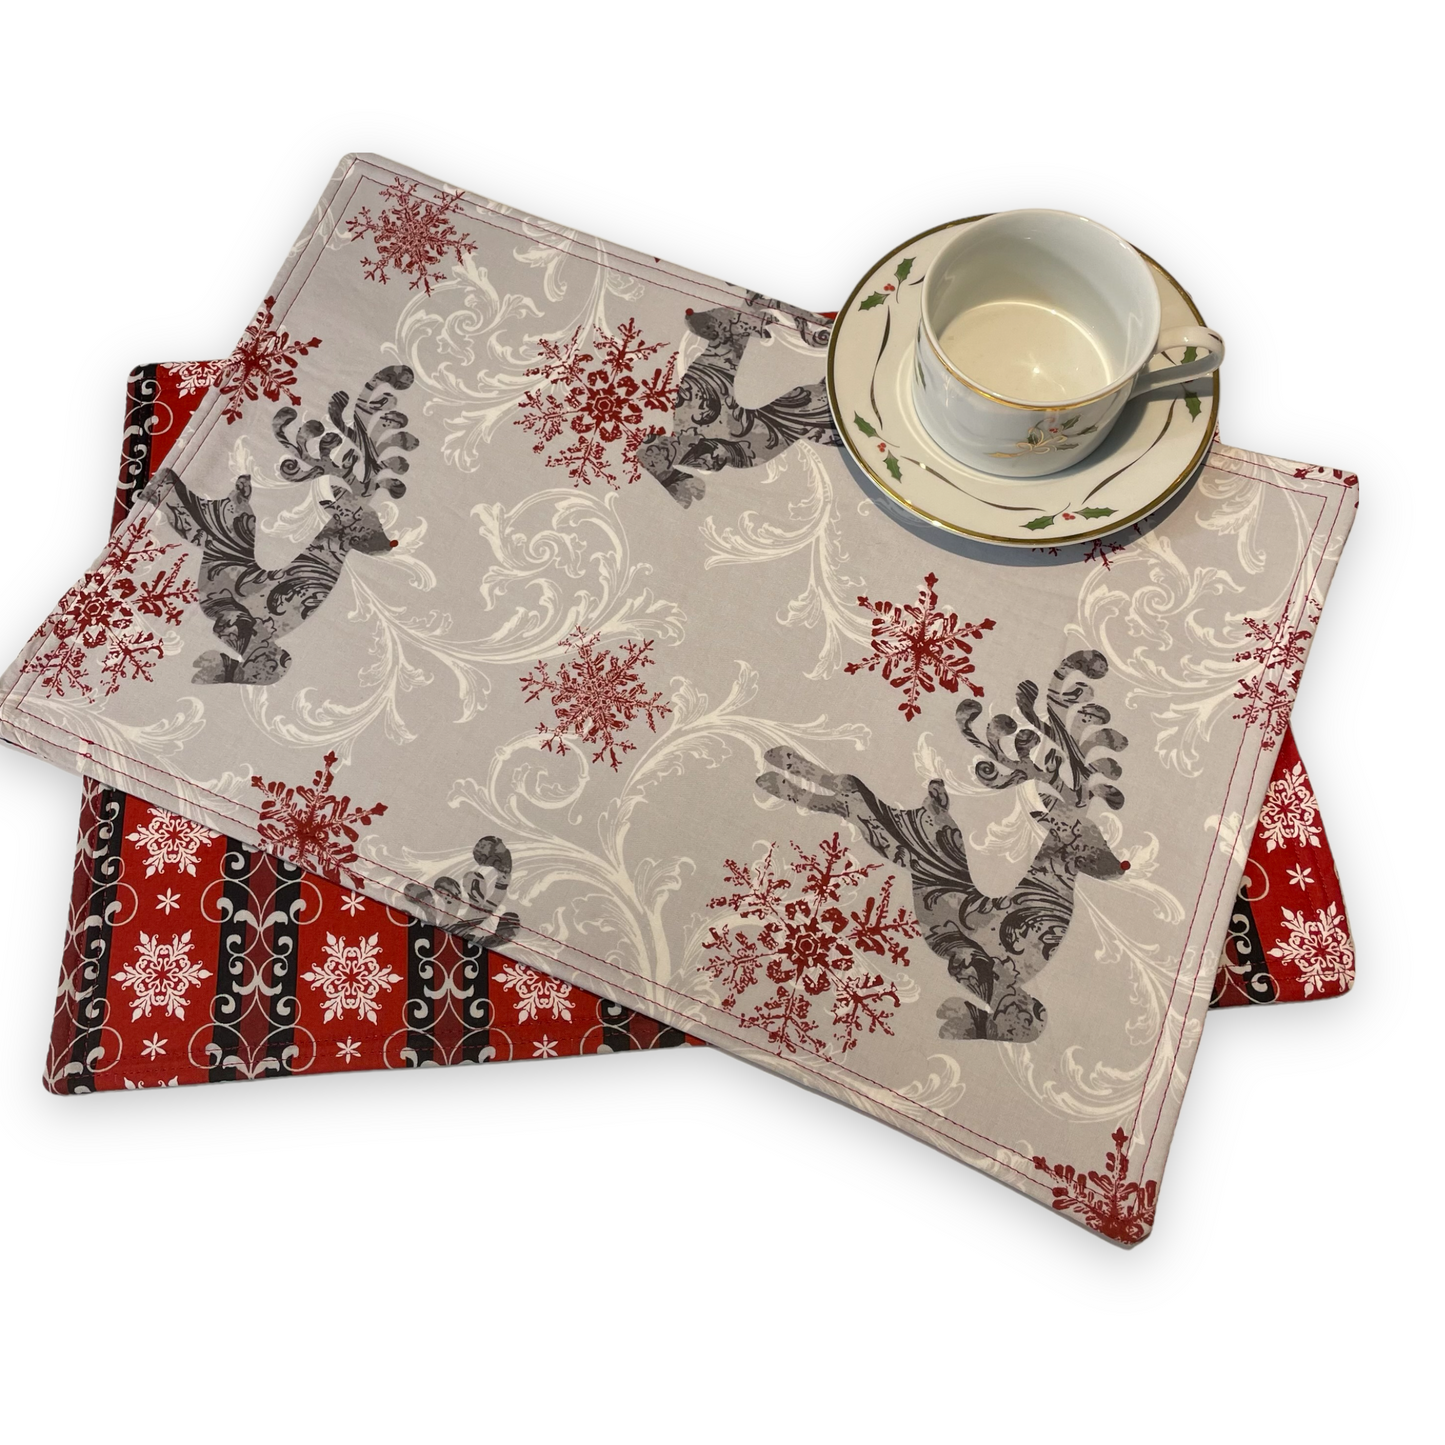 Set of Two Christmas Dinner Placemats, Reversible Set of Christmas Placeats - Home Stitchery Decor